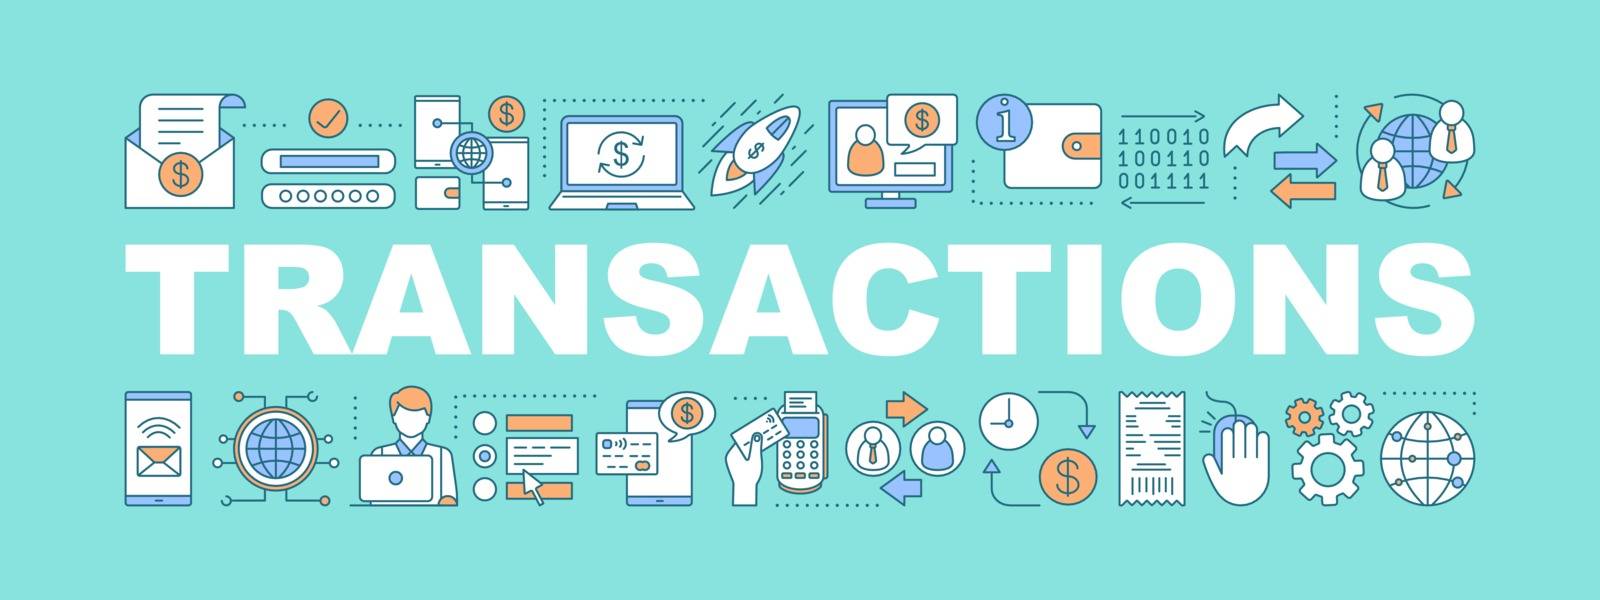 Transactions word concepts banner. Financial management. Payment, e-commerce, banking. Presentation, website concept. Isolated lettering typography idea with linear icons. Vector outline illustration